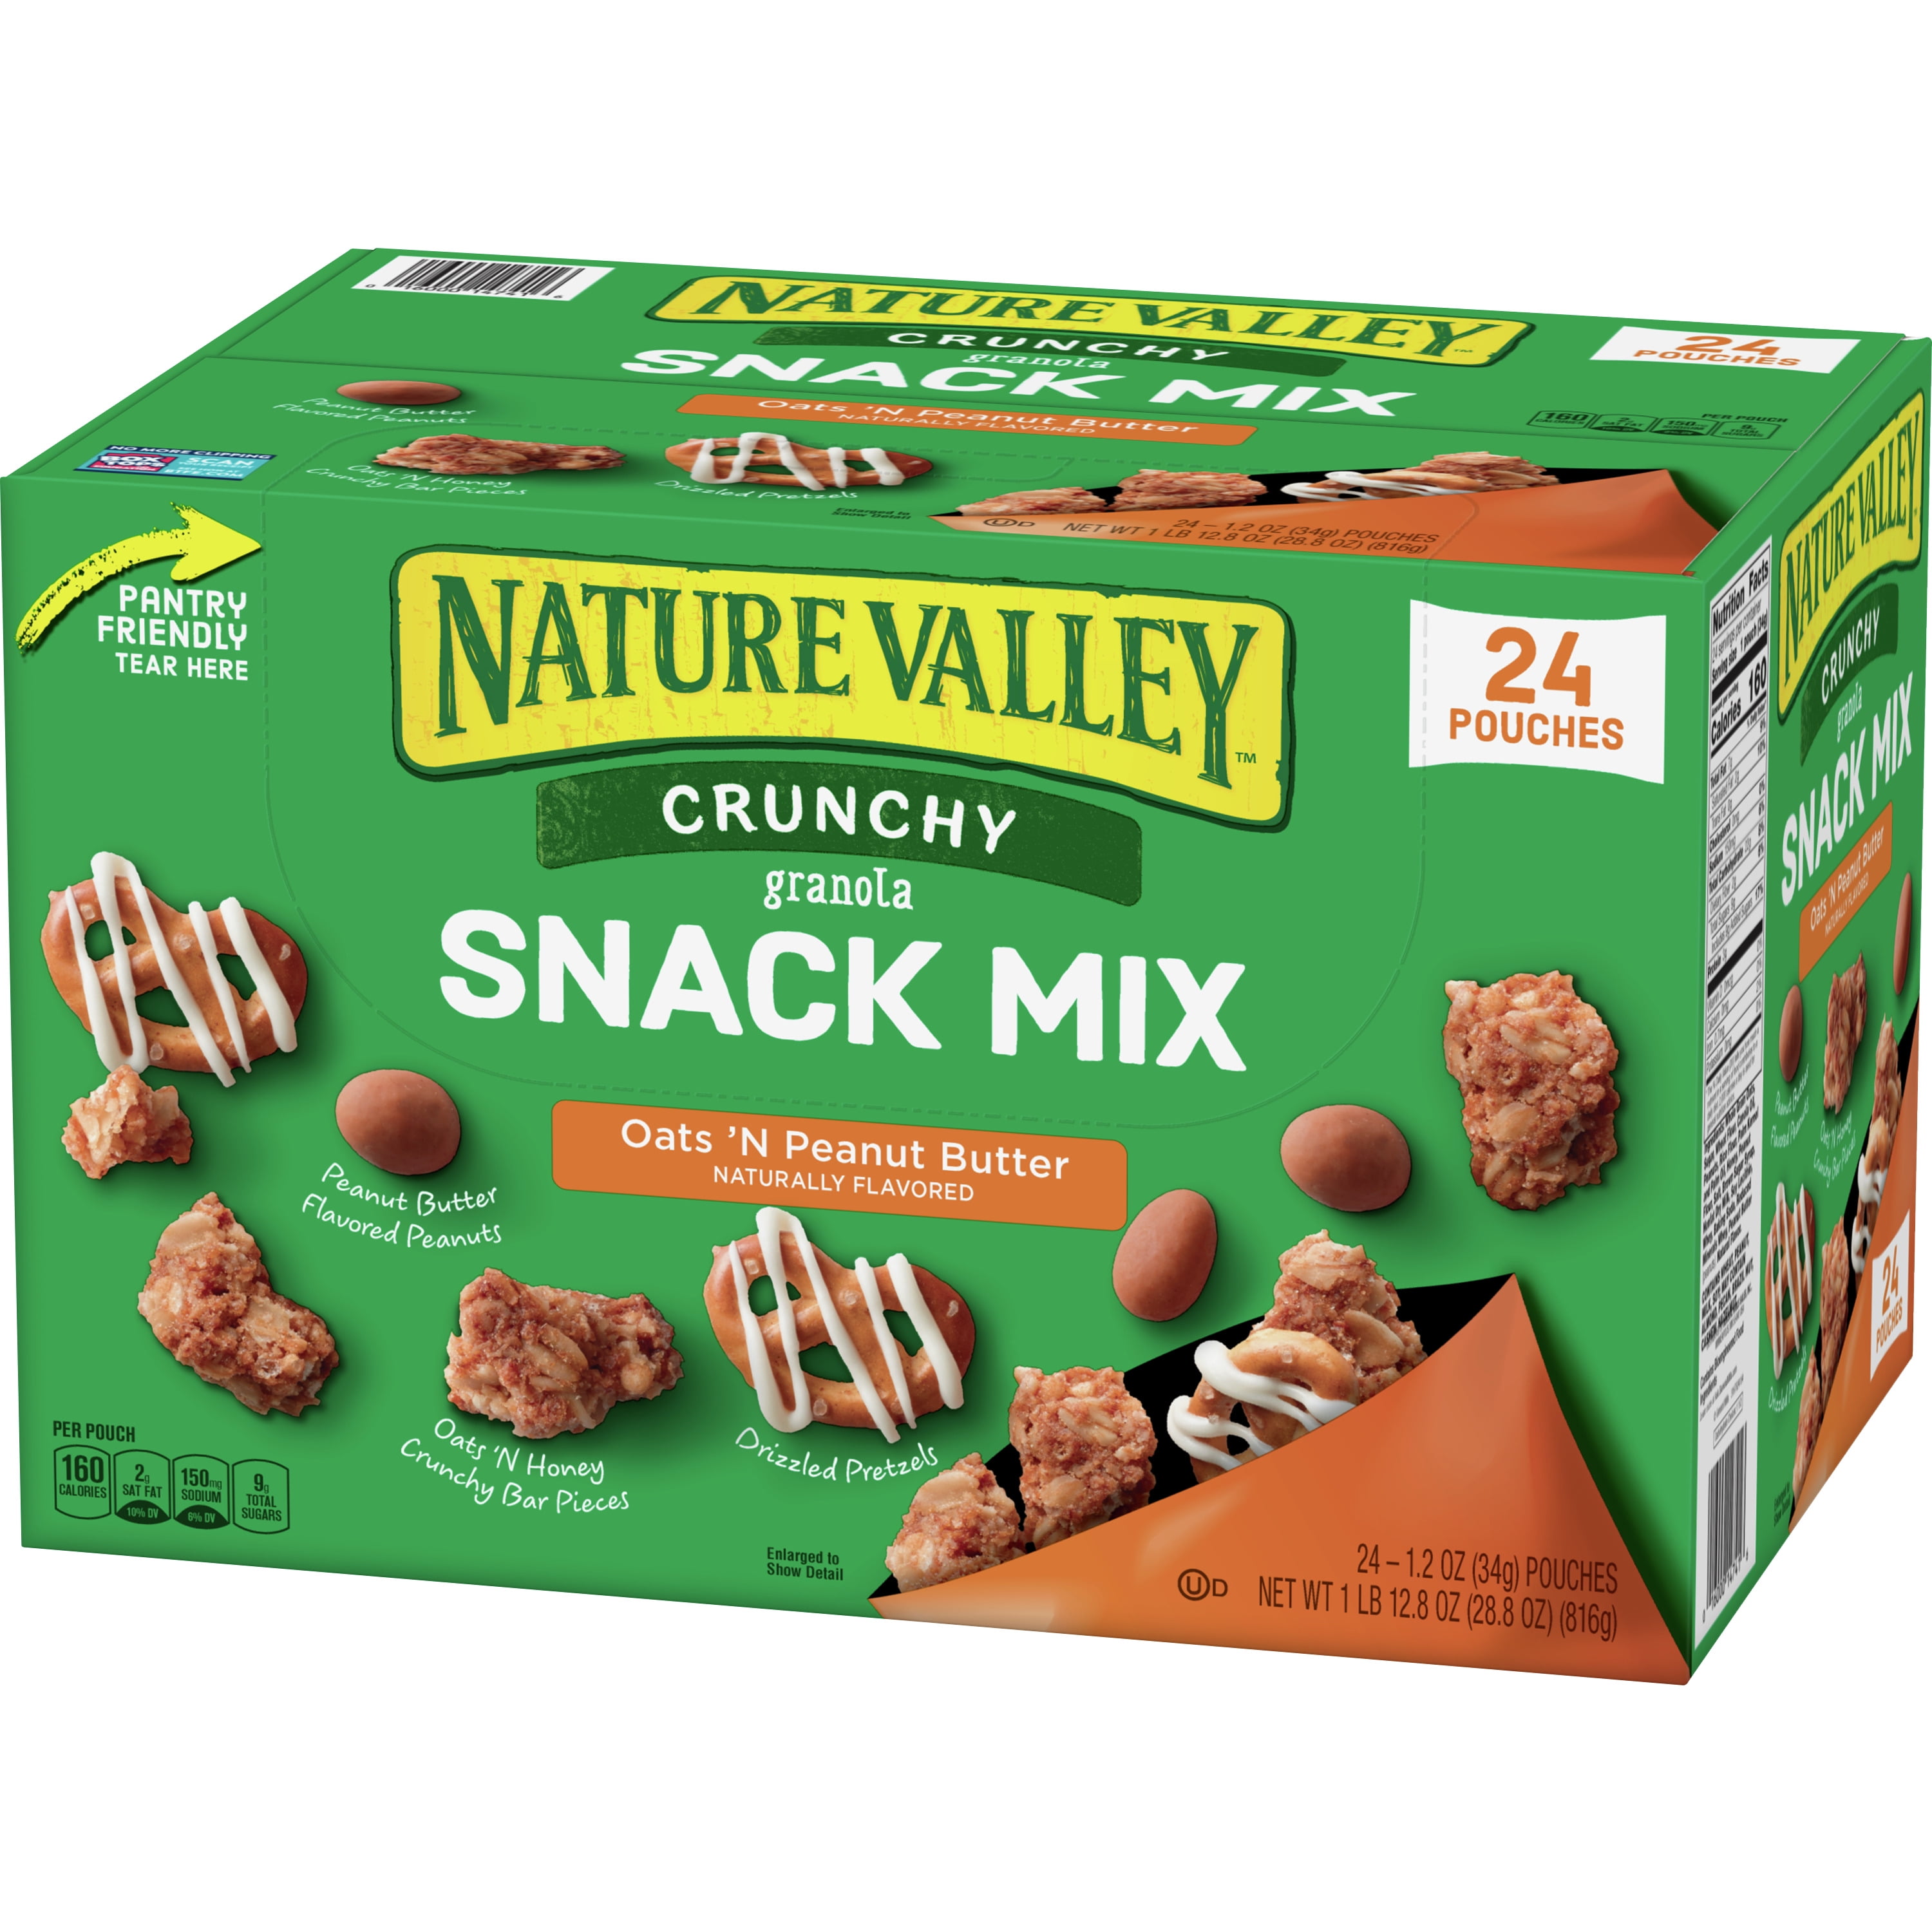 Kilo Solution Healthy Snack Mix (24 x 32 g), Delivery Near You